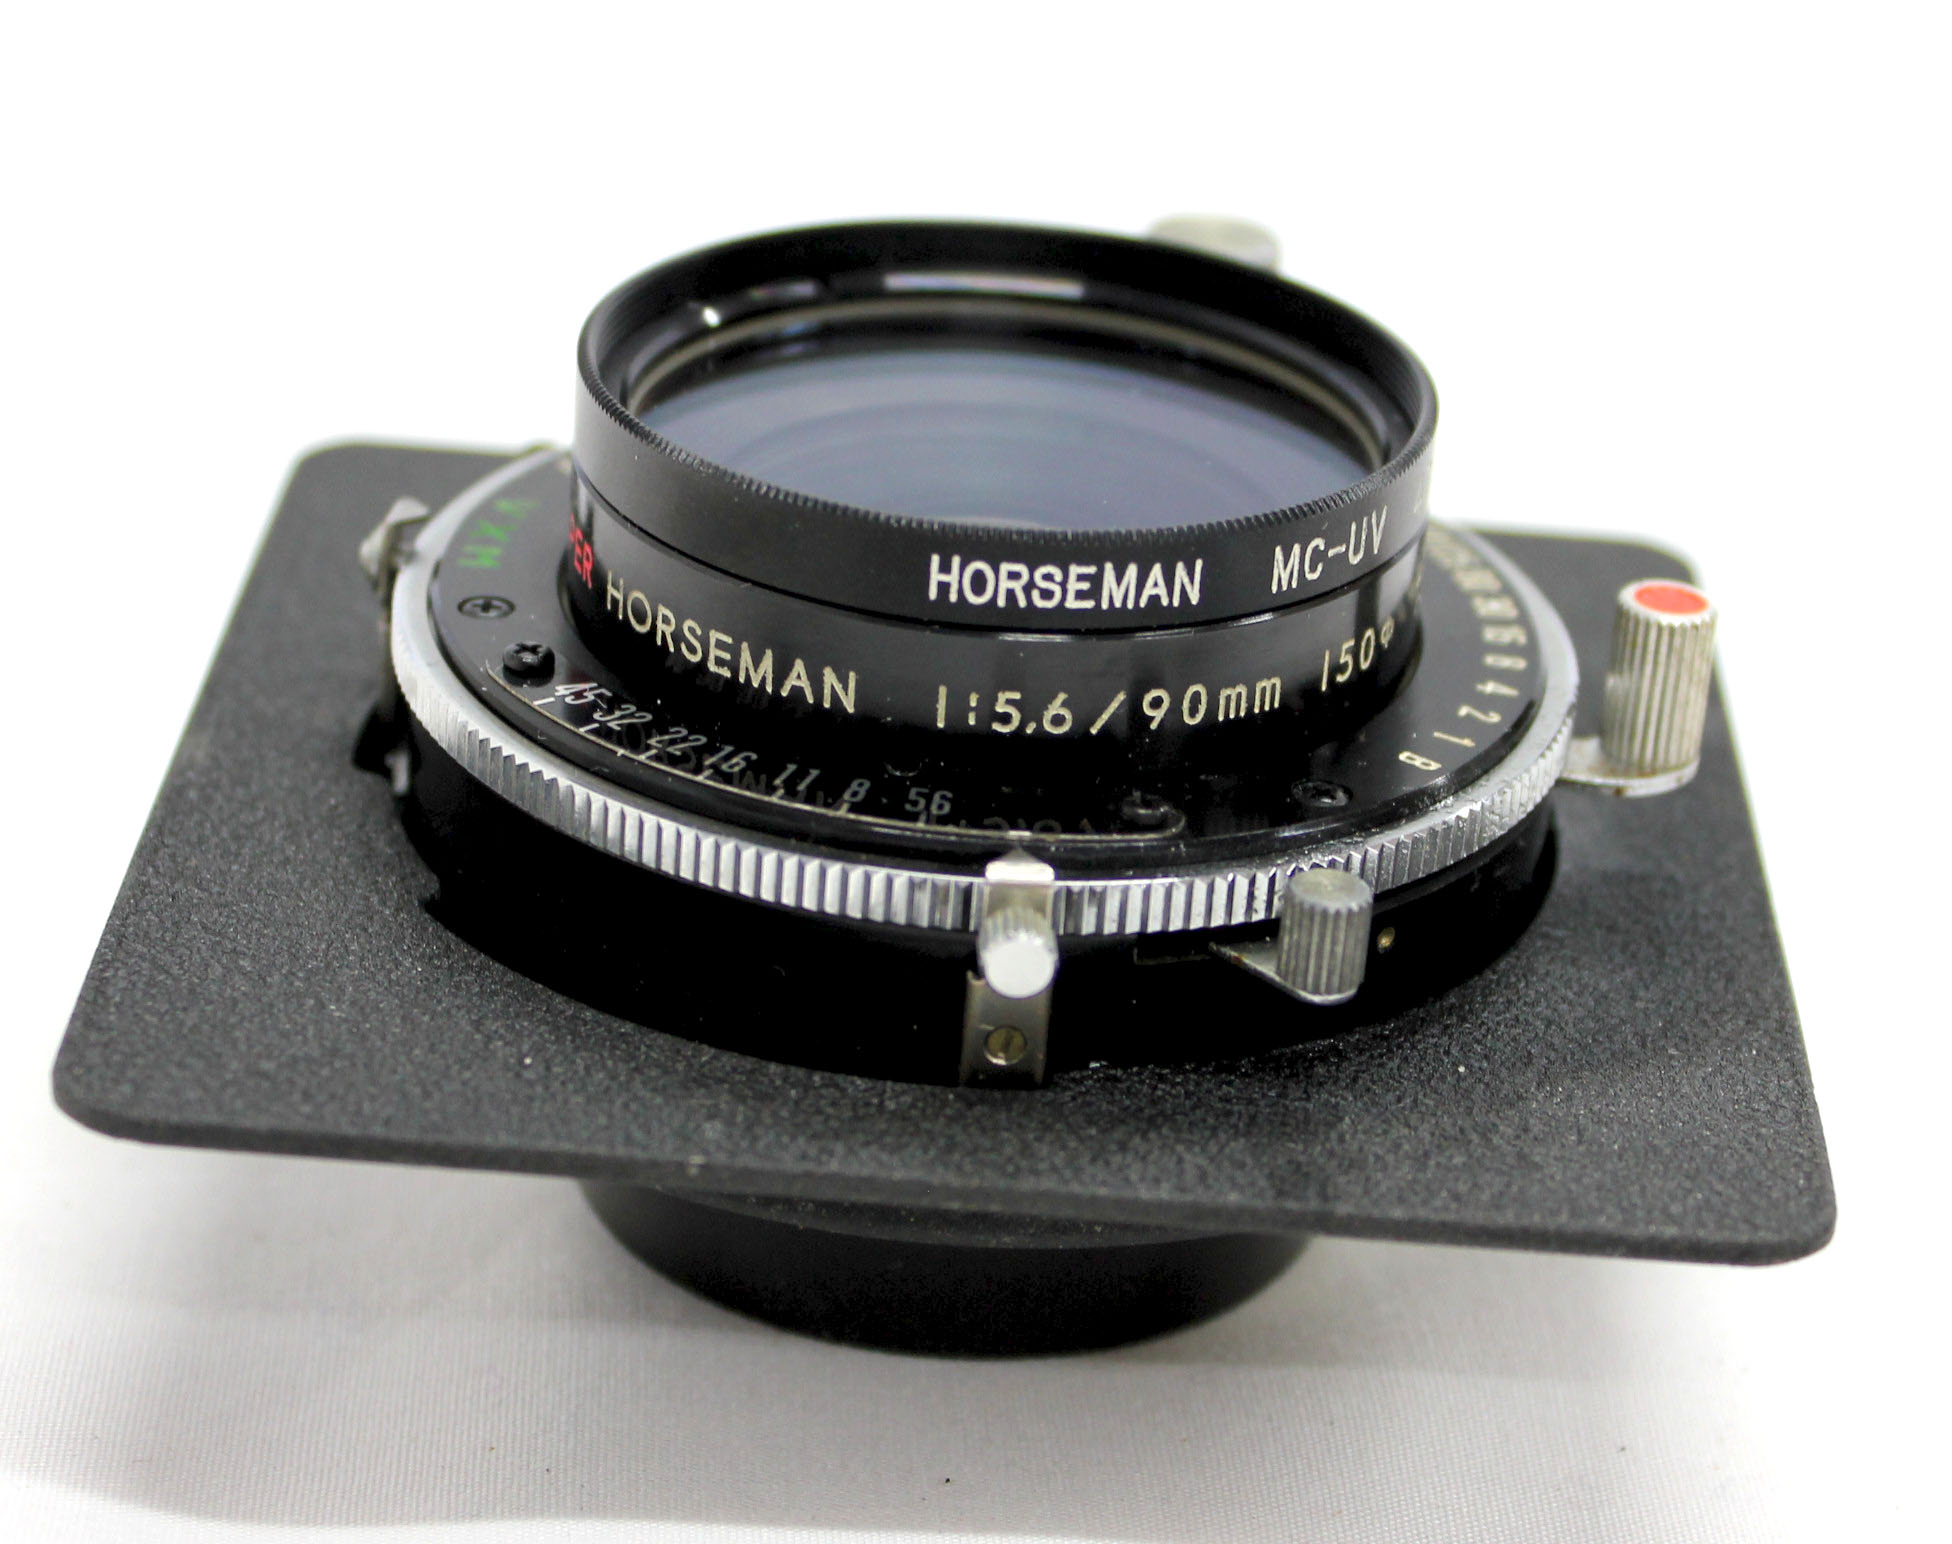  Topcon Horseman VH-R with Super Horseman 90mm F/5.6 Lens from Japan Photo 19